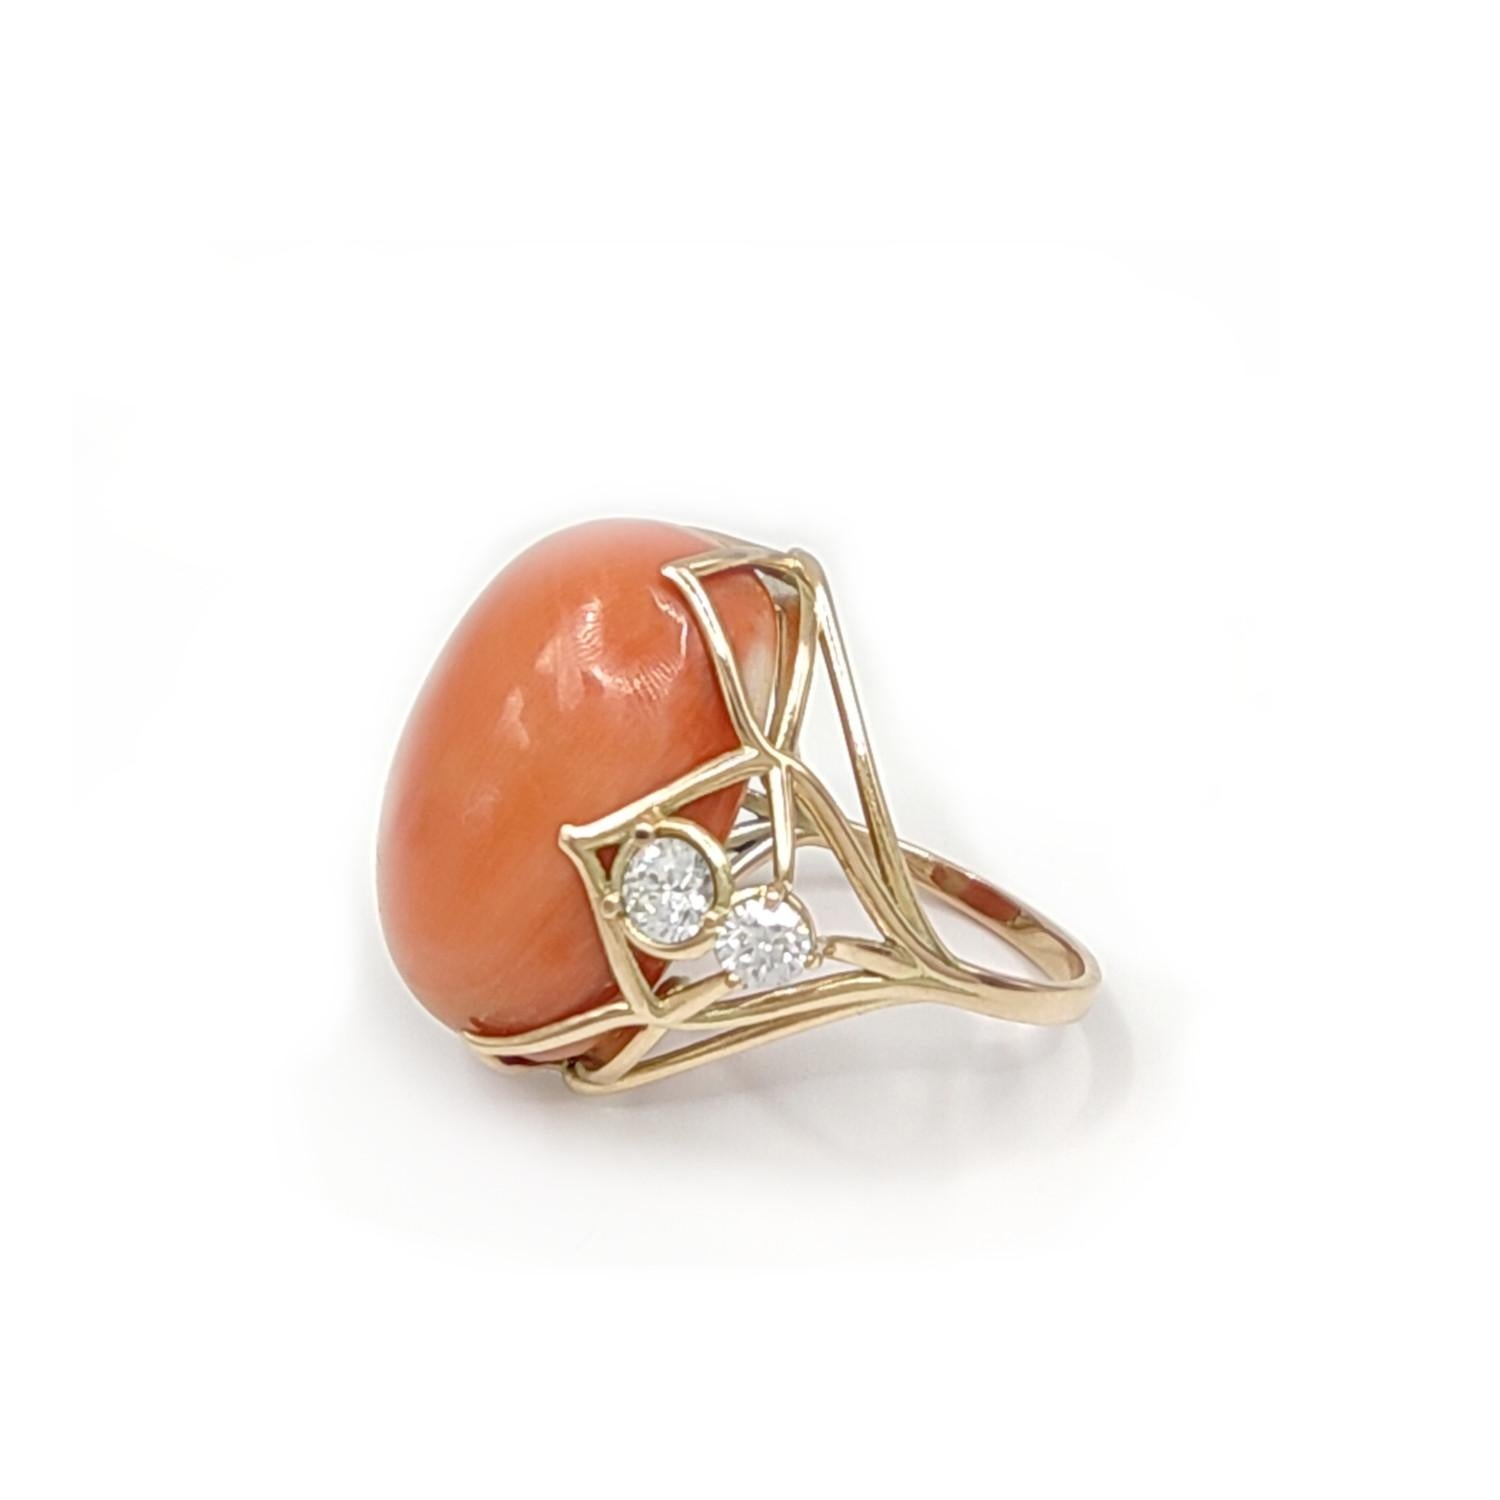 Women's Coral, Diamonds, 14 Karat Yellow Gold Ring for woman Gift for her, Certified For Sale